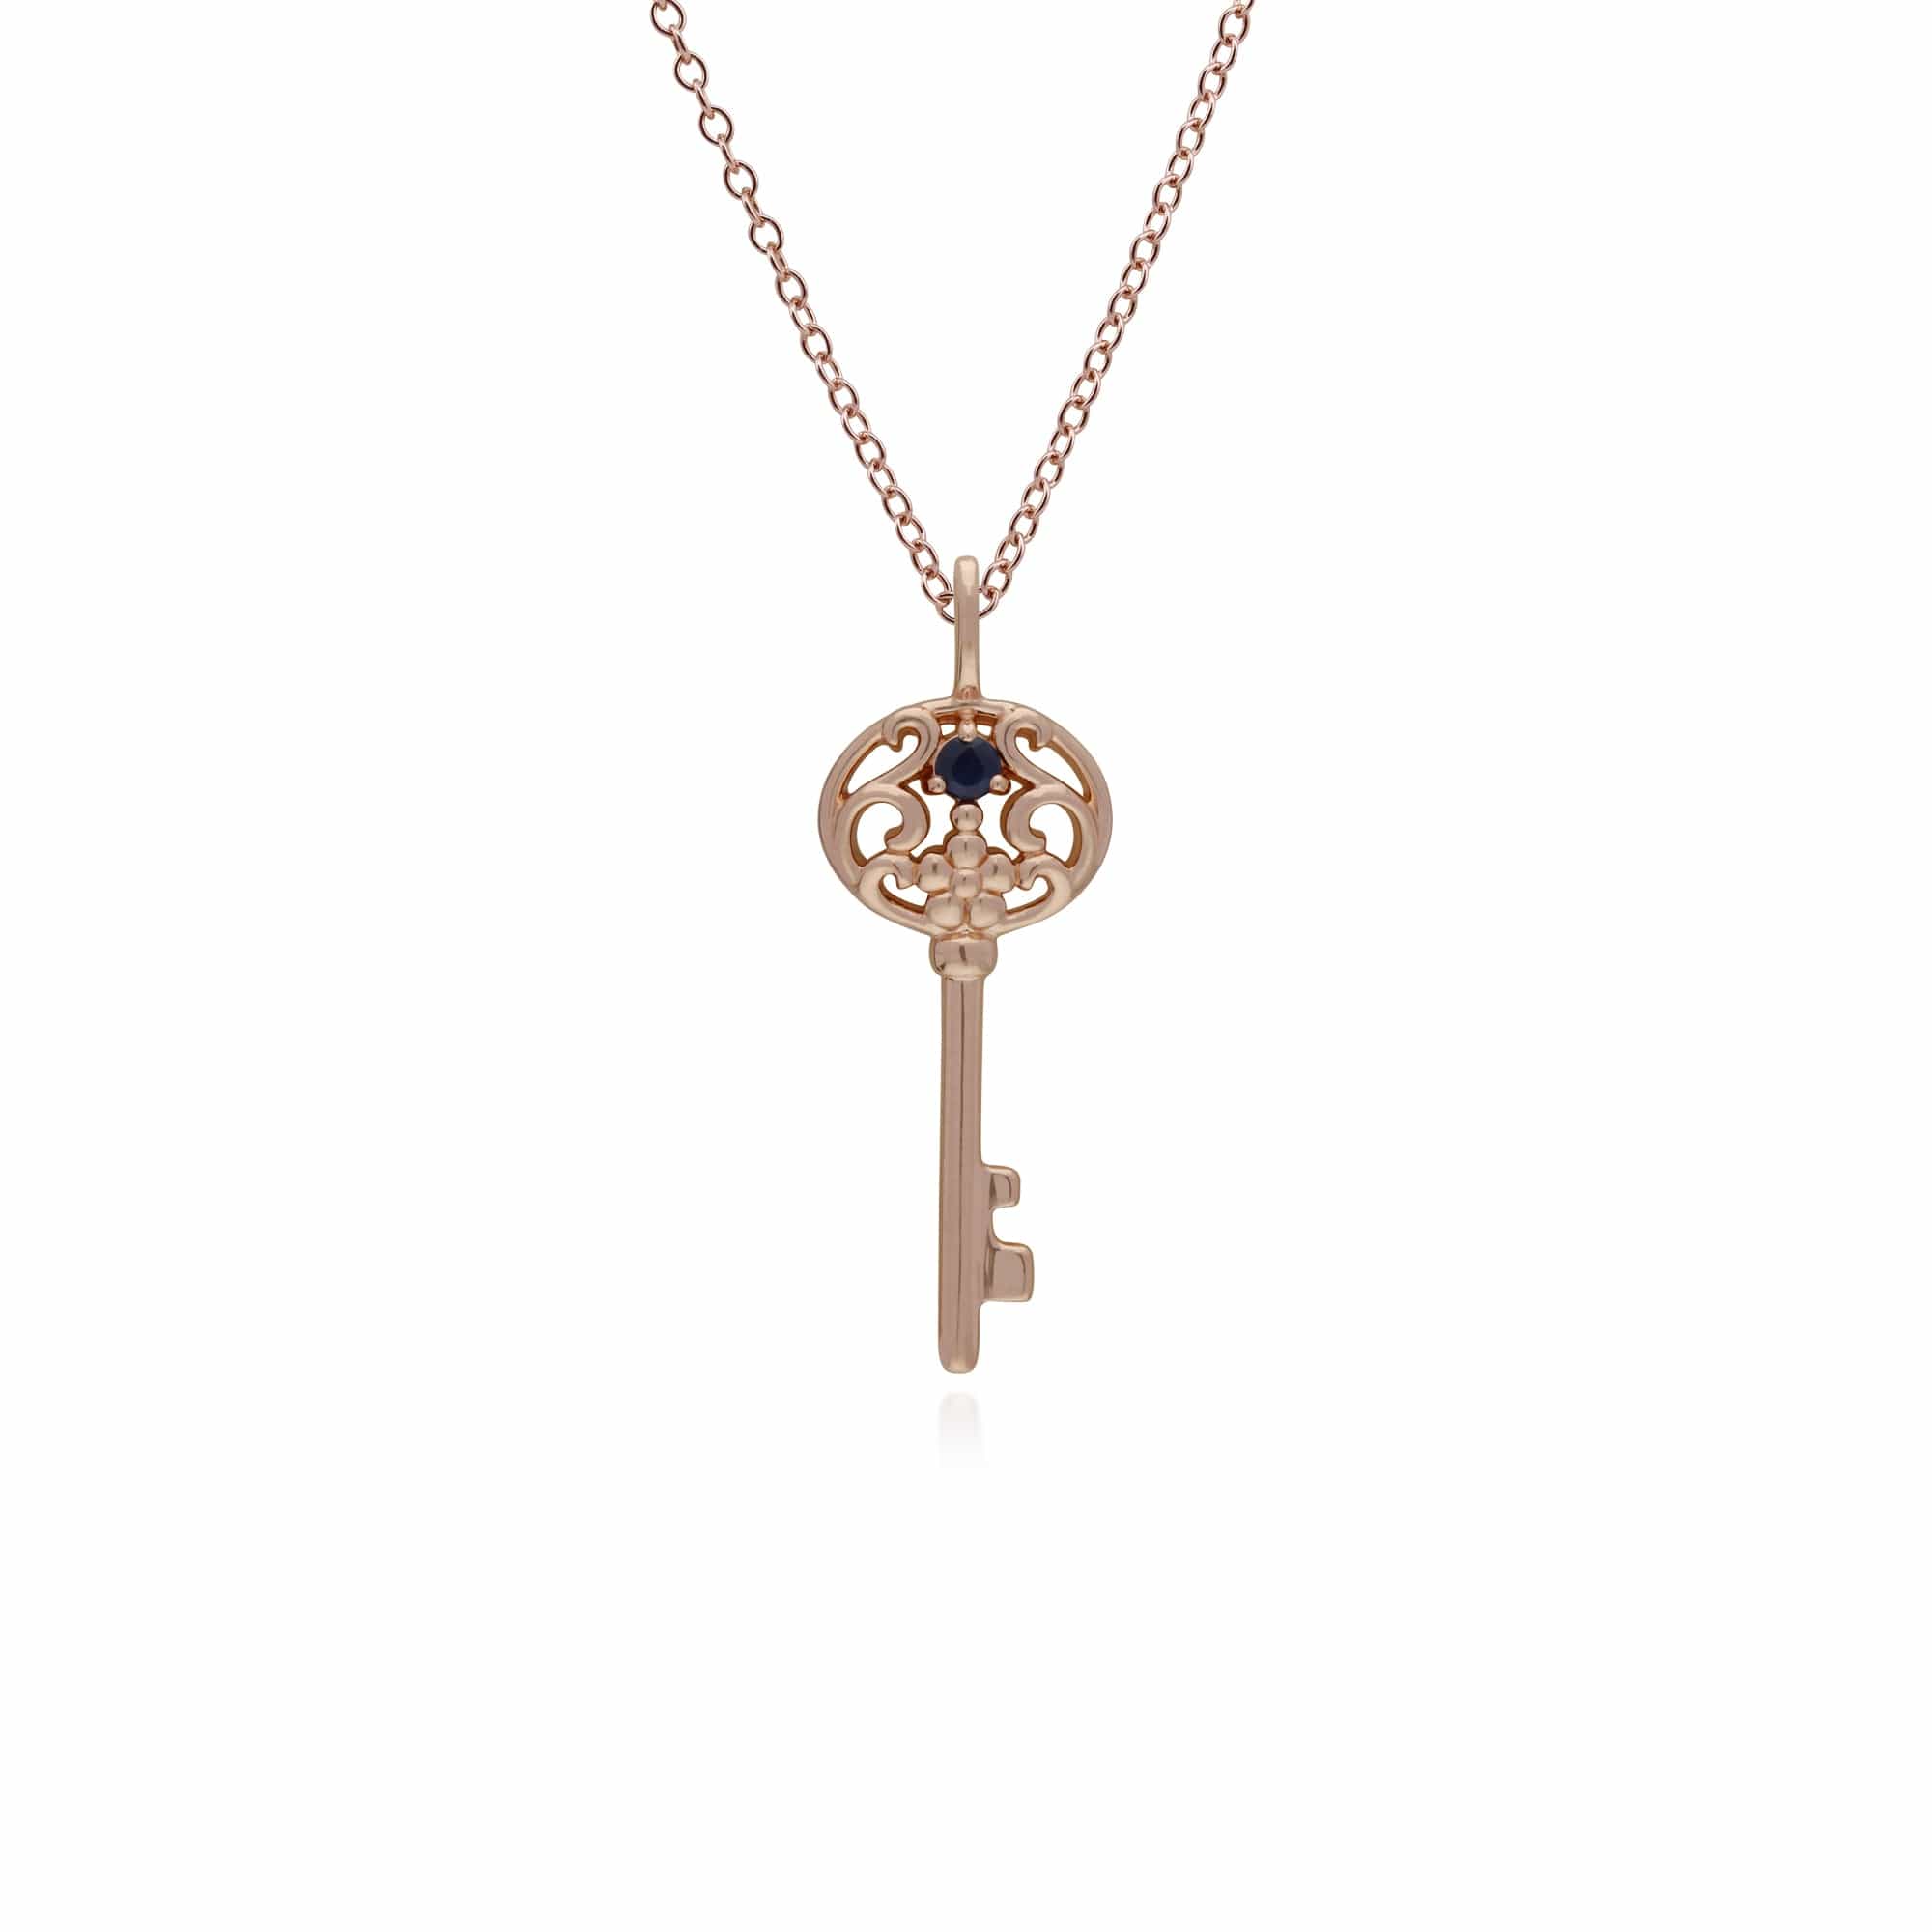 270P026701925-270P026901925 Classic Heart Lock Pendant & Sapphire Big Key Charm in Rose Gold Plated 925 Sterling Silver 2